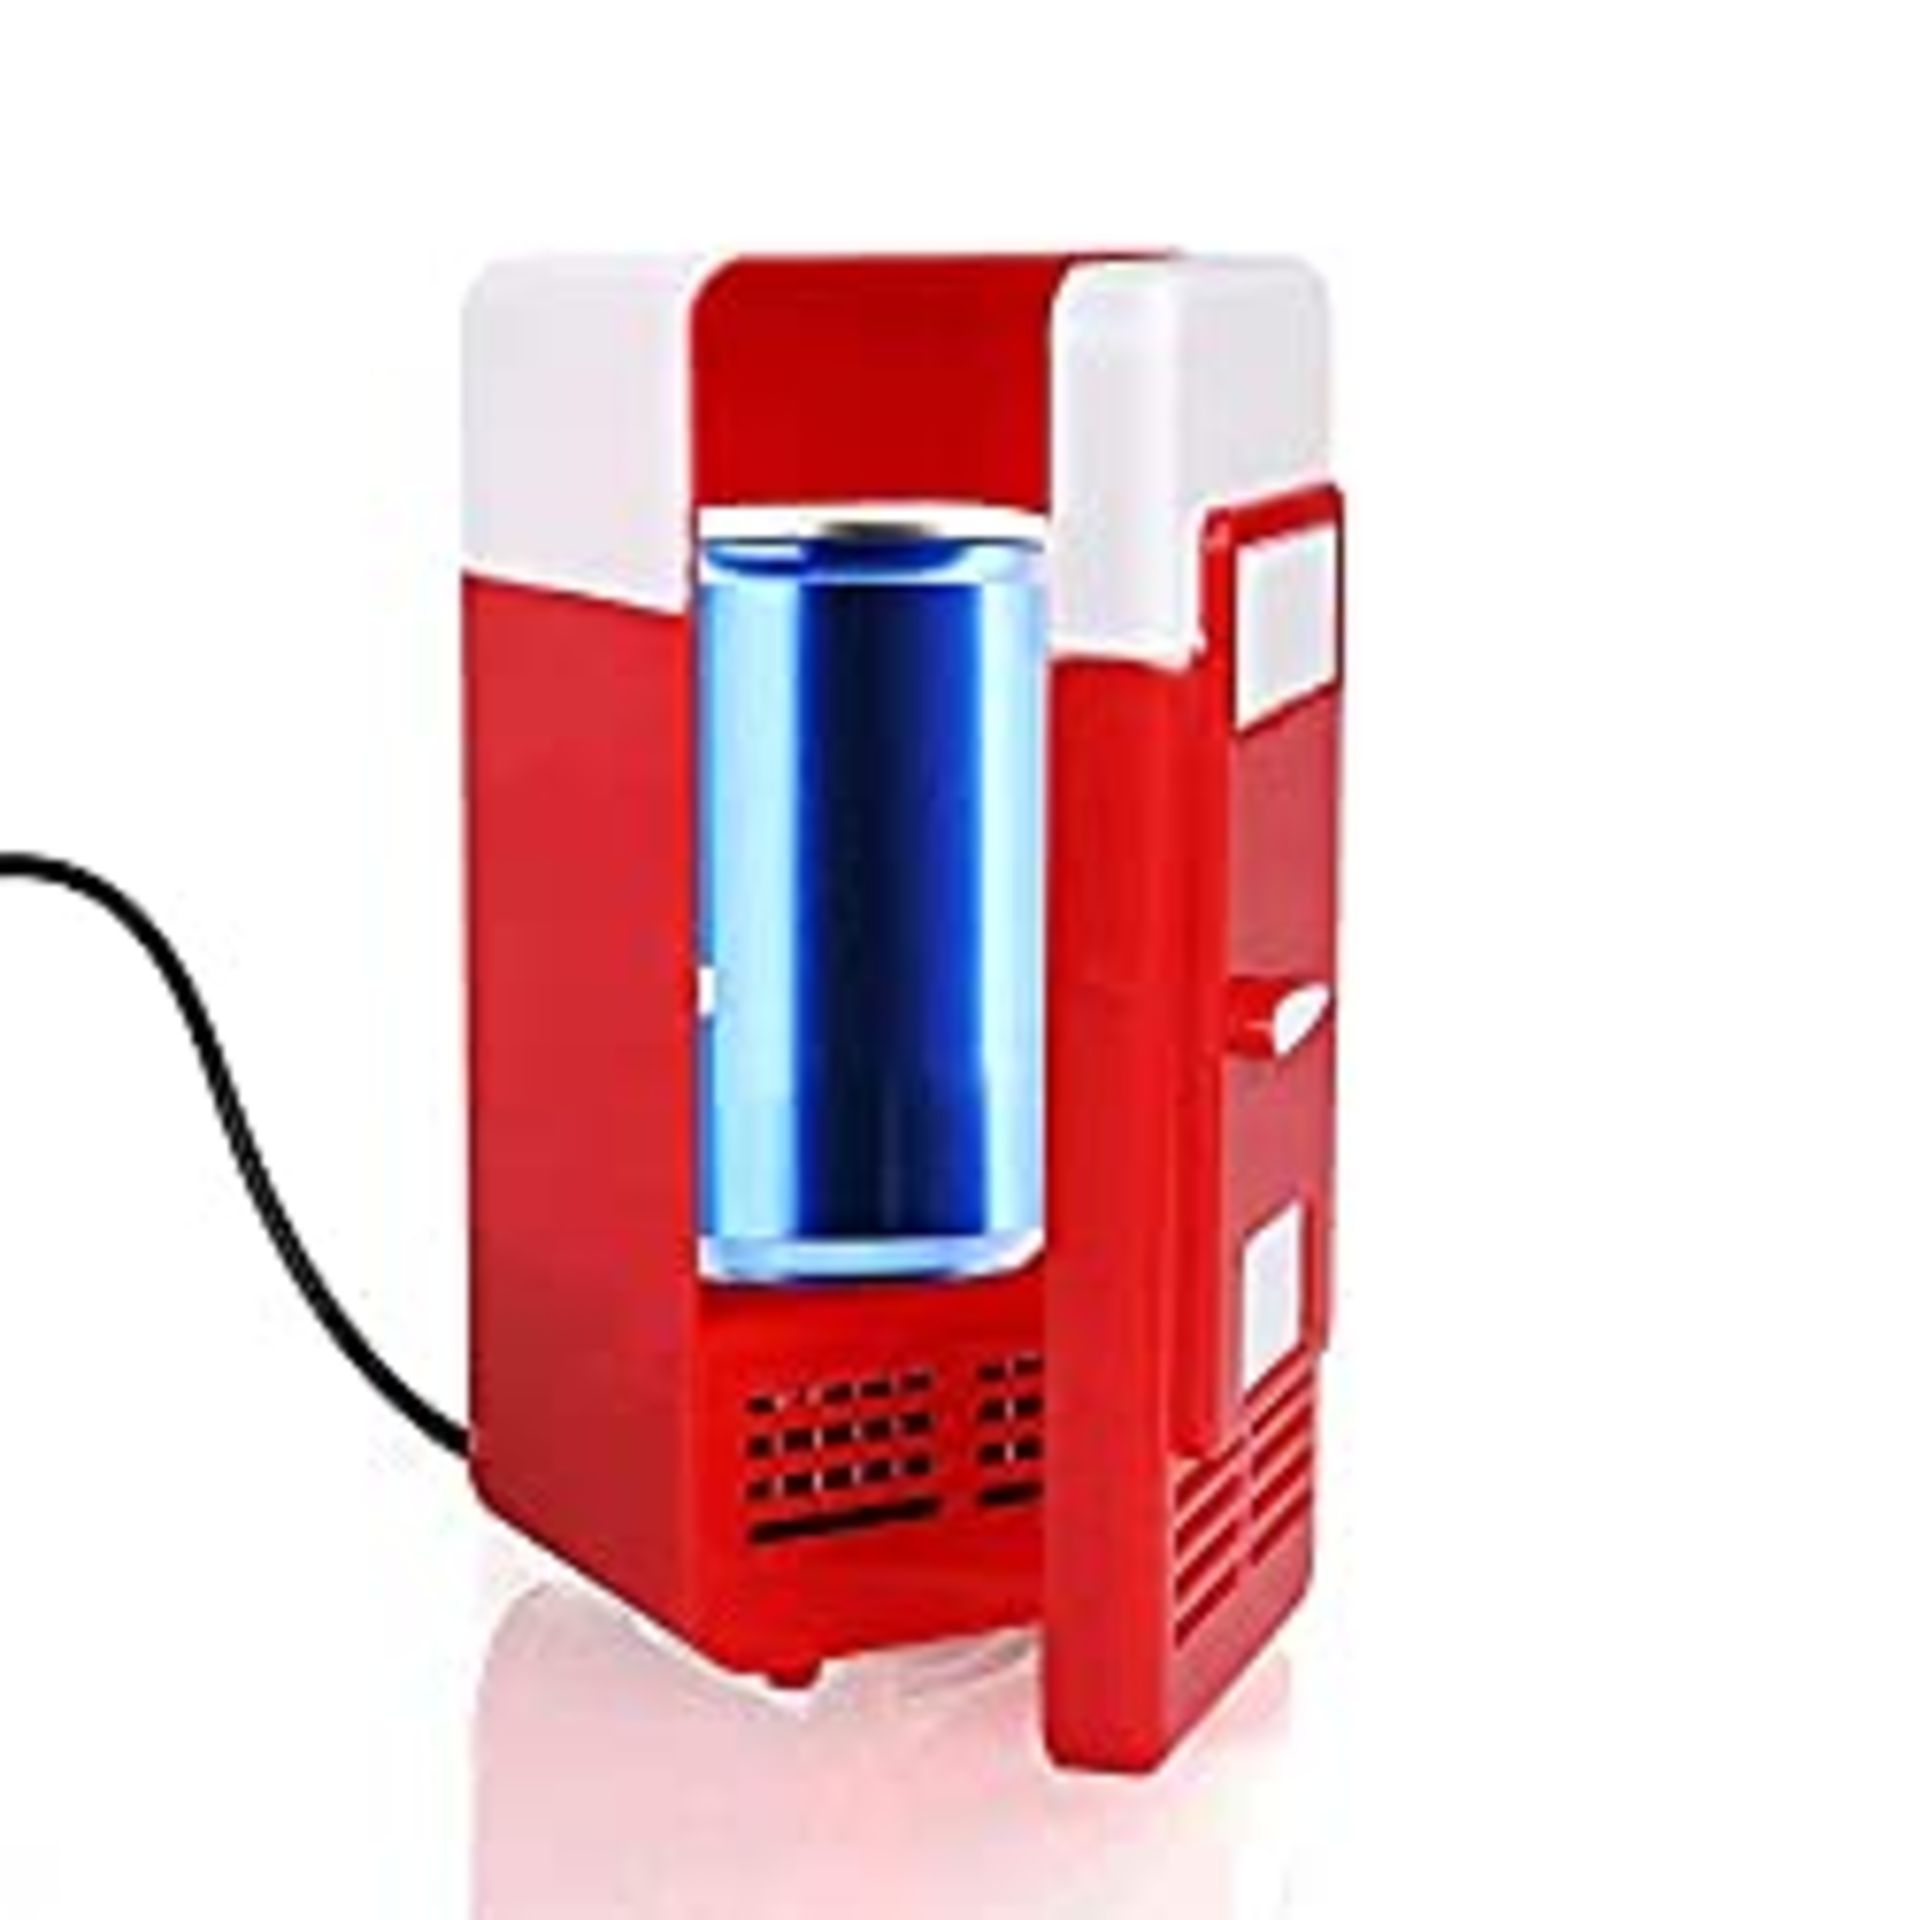 RRP £14.96 Discoball Mini Fridge Portable Small USB Cooler and Warmer LED Light (Red)